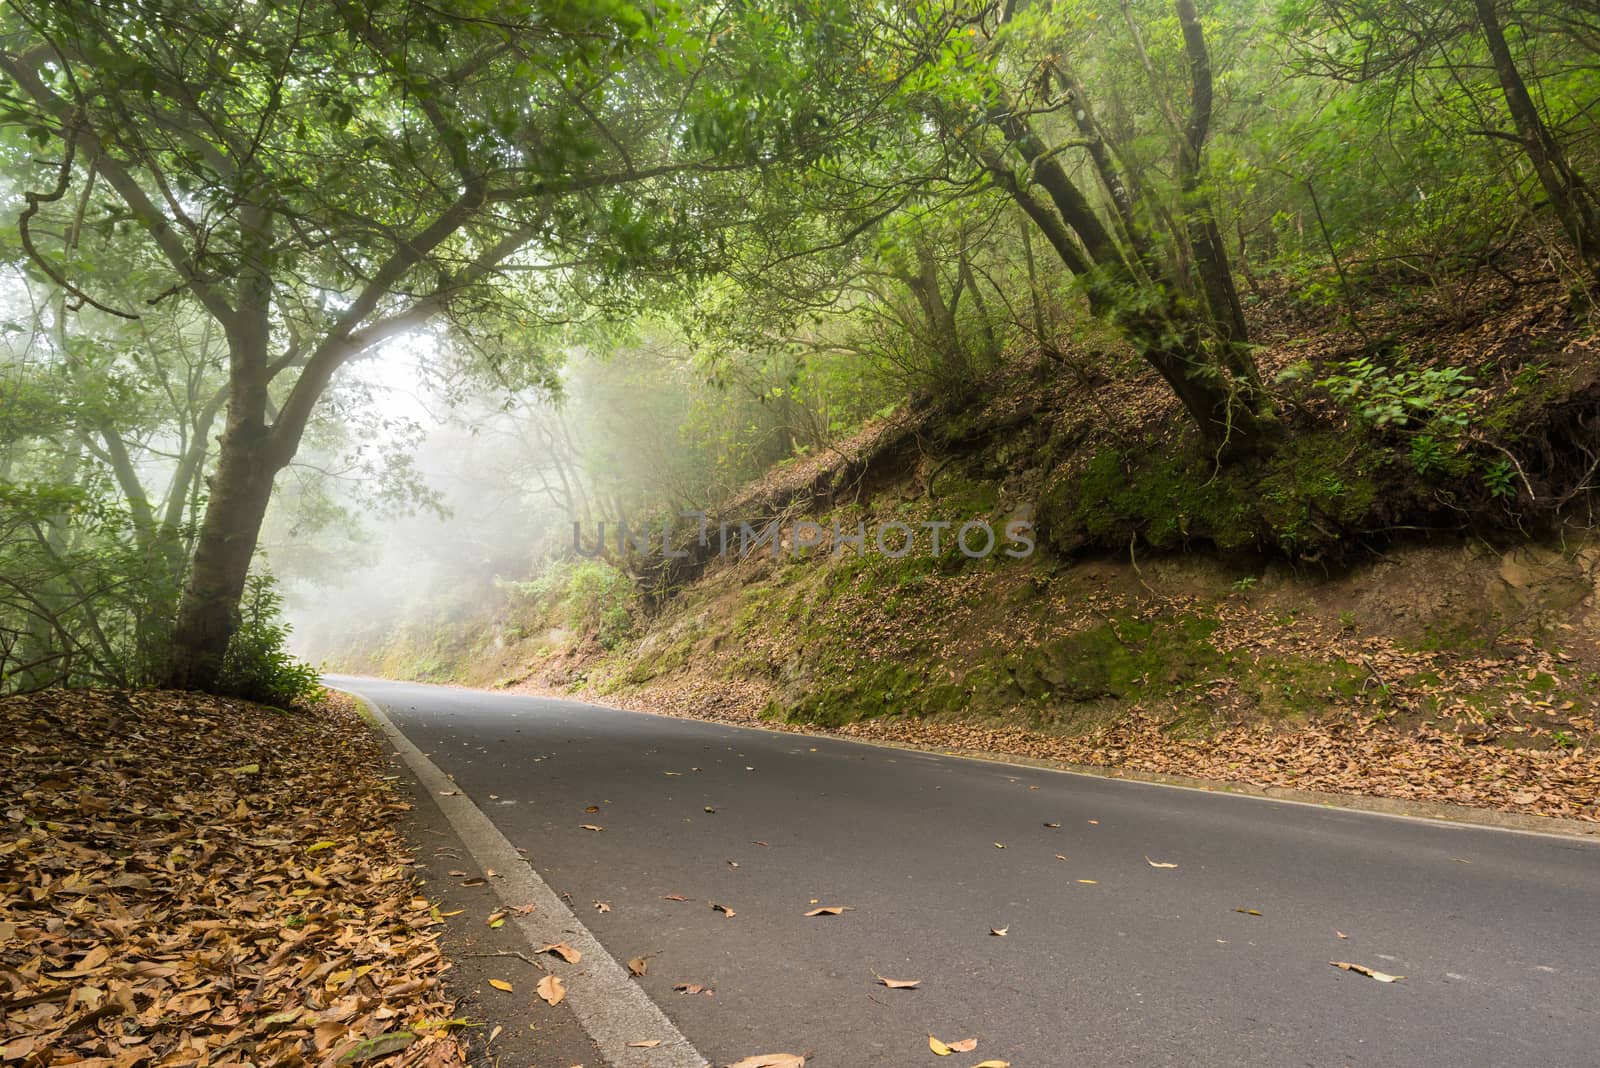 Road in the misty forest.